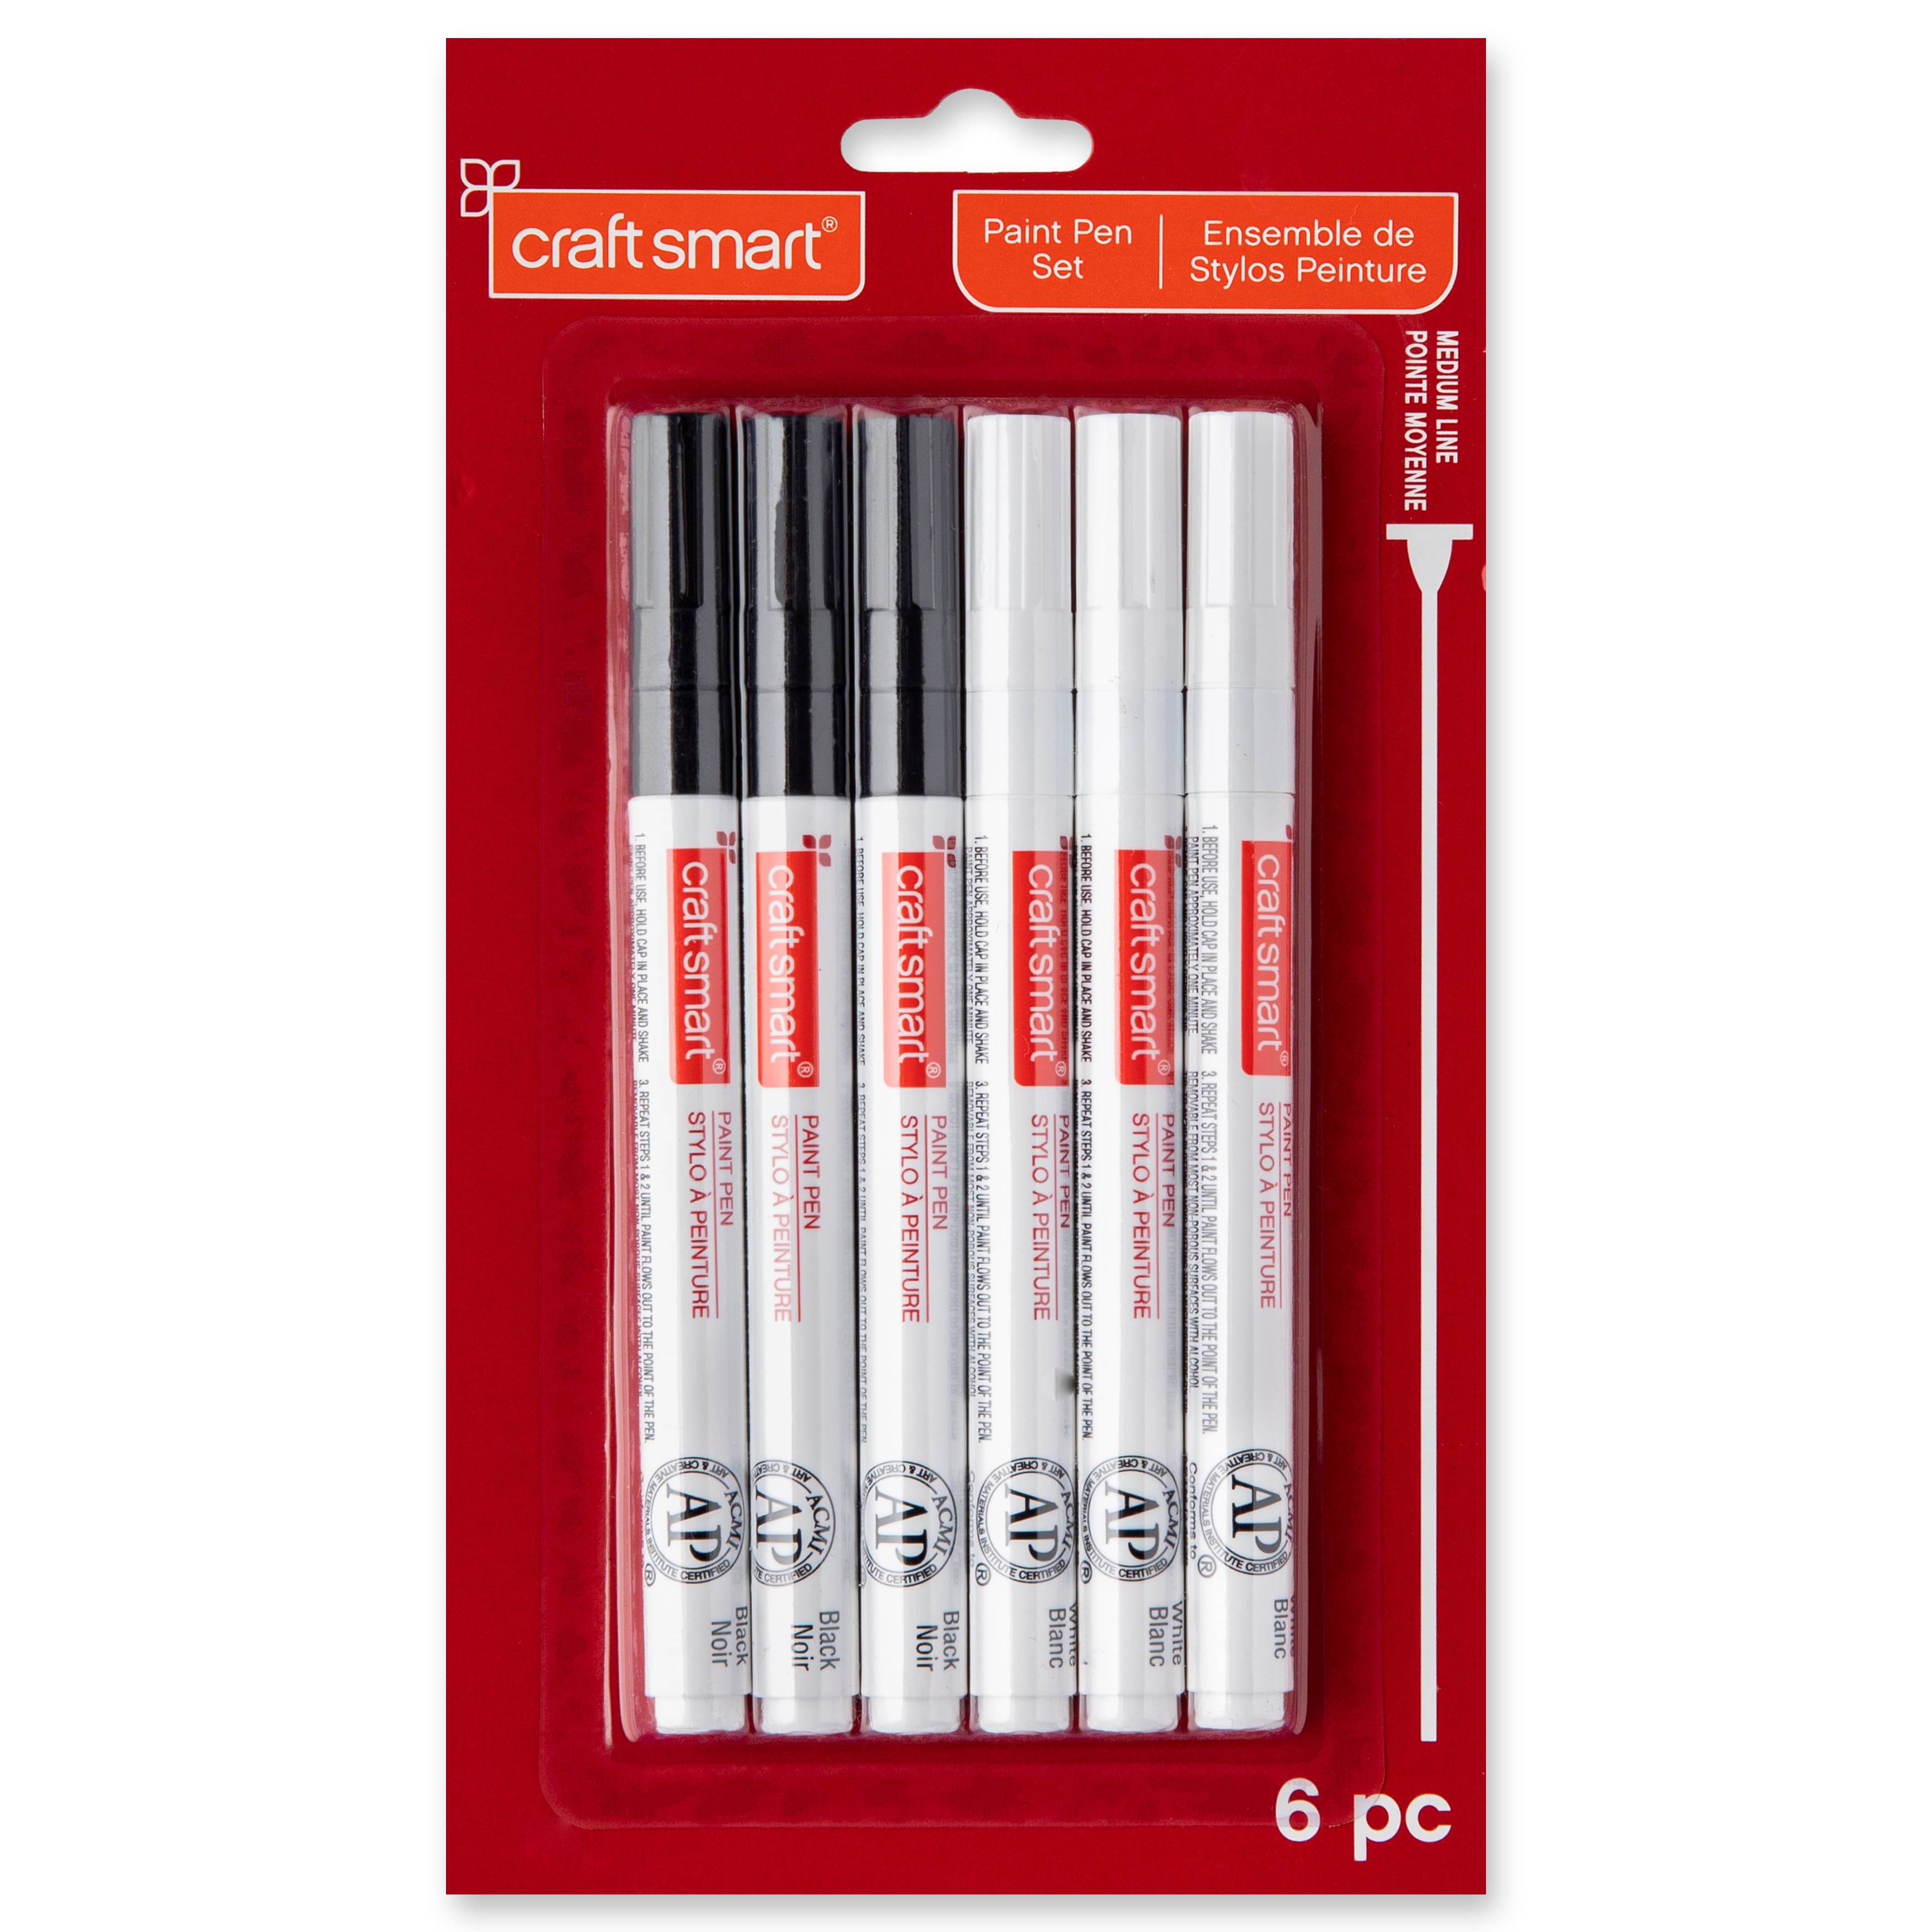 Black and White Sketch Pens (Set of 4) - MidSouth Crafting Supplies